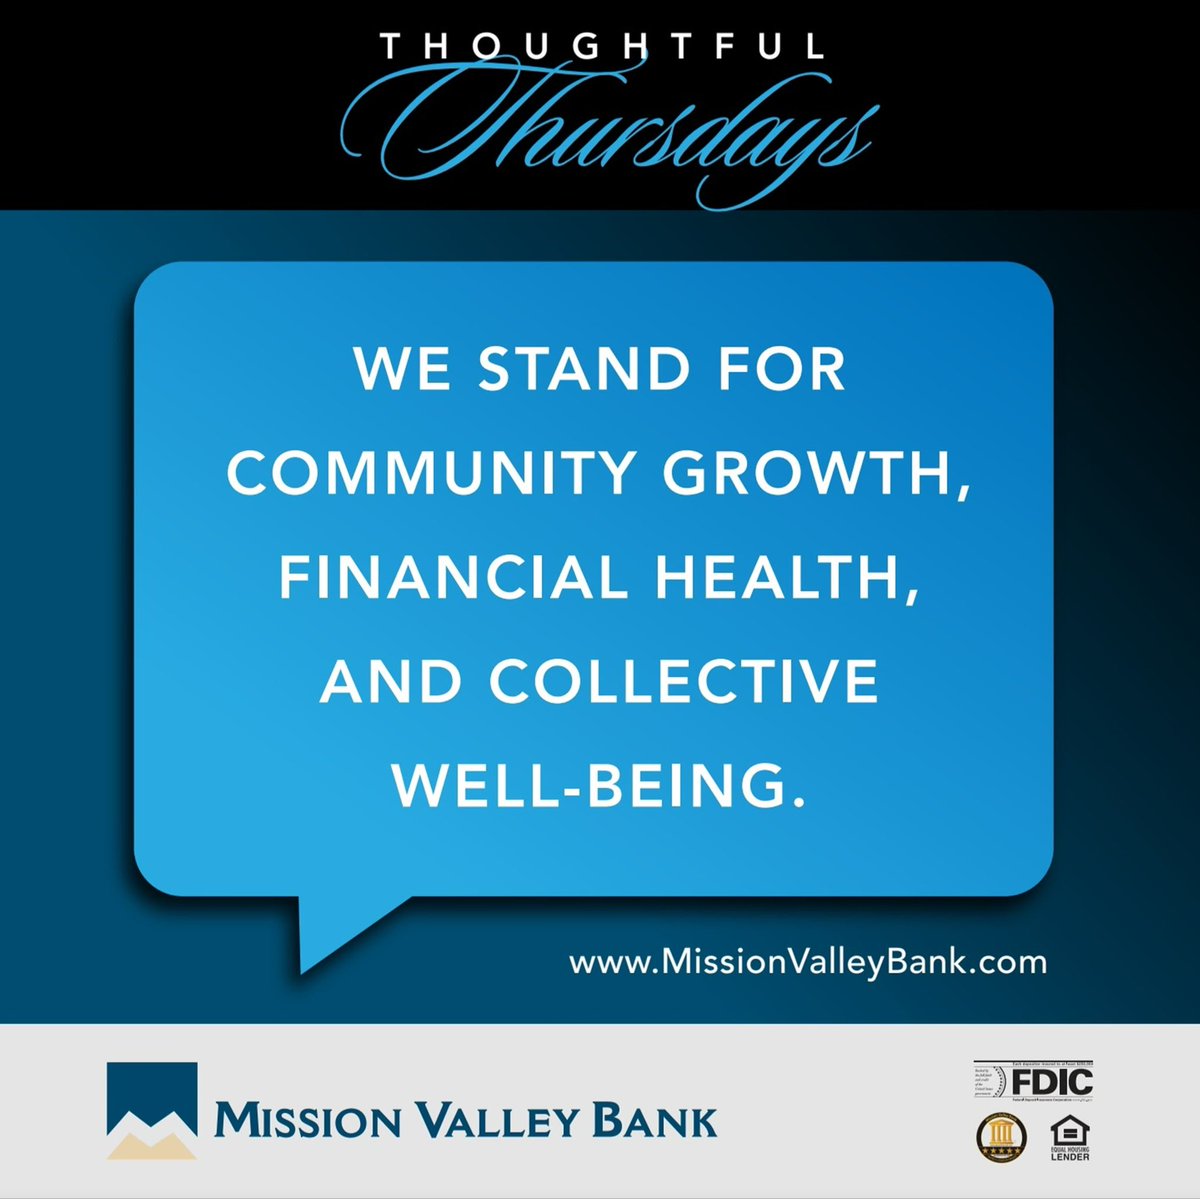 Welcome to #ThoughtfulThursdays with Mission Valley Bank!

Enjoy your Thursday. The Weekend is Almost Here!   

#MissionValleyBank  #Success #RedefiningFinance #BusinessBanking #BusinessGrowth #TeamAppreciation #RelationshipBanking #Community